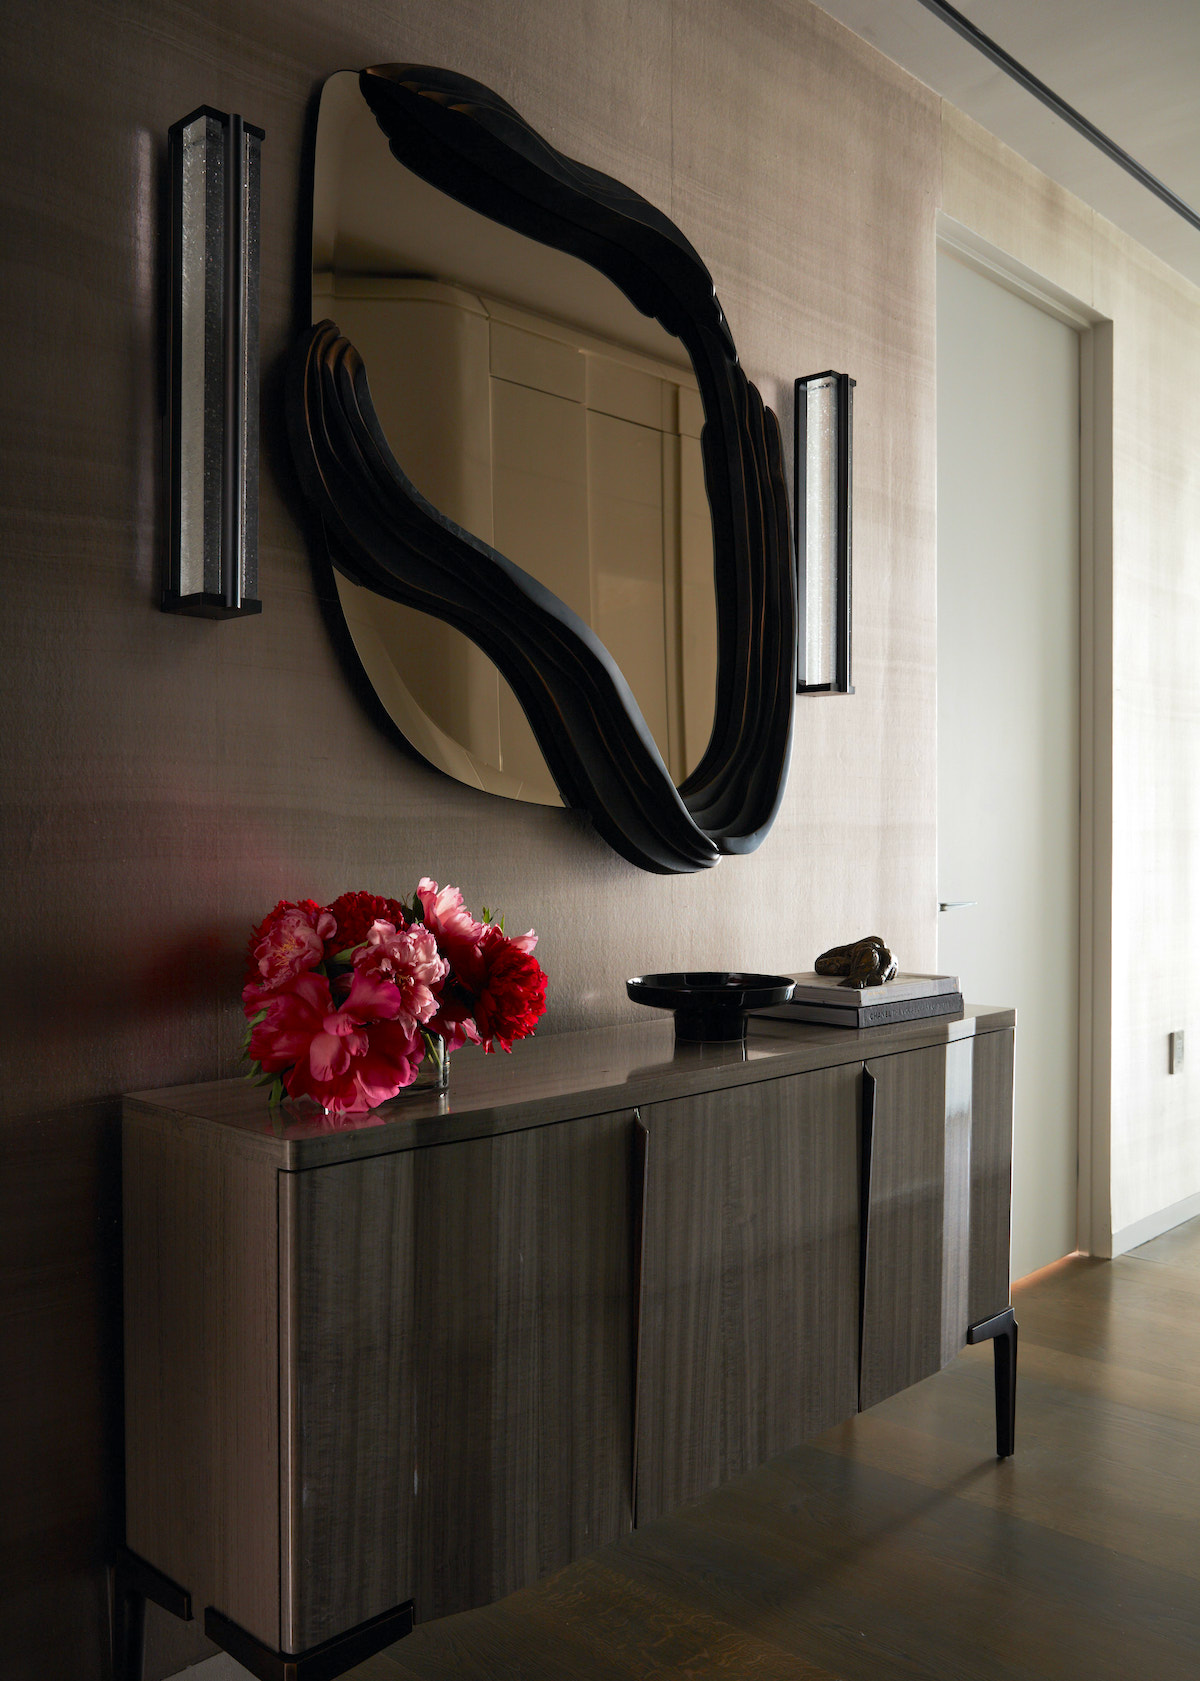 Contemporary styled mirror over a contemporary cabinet.